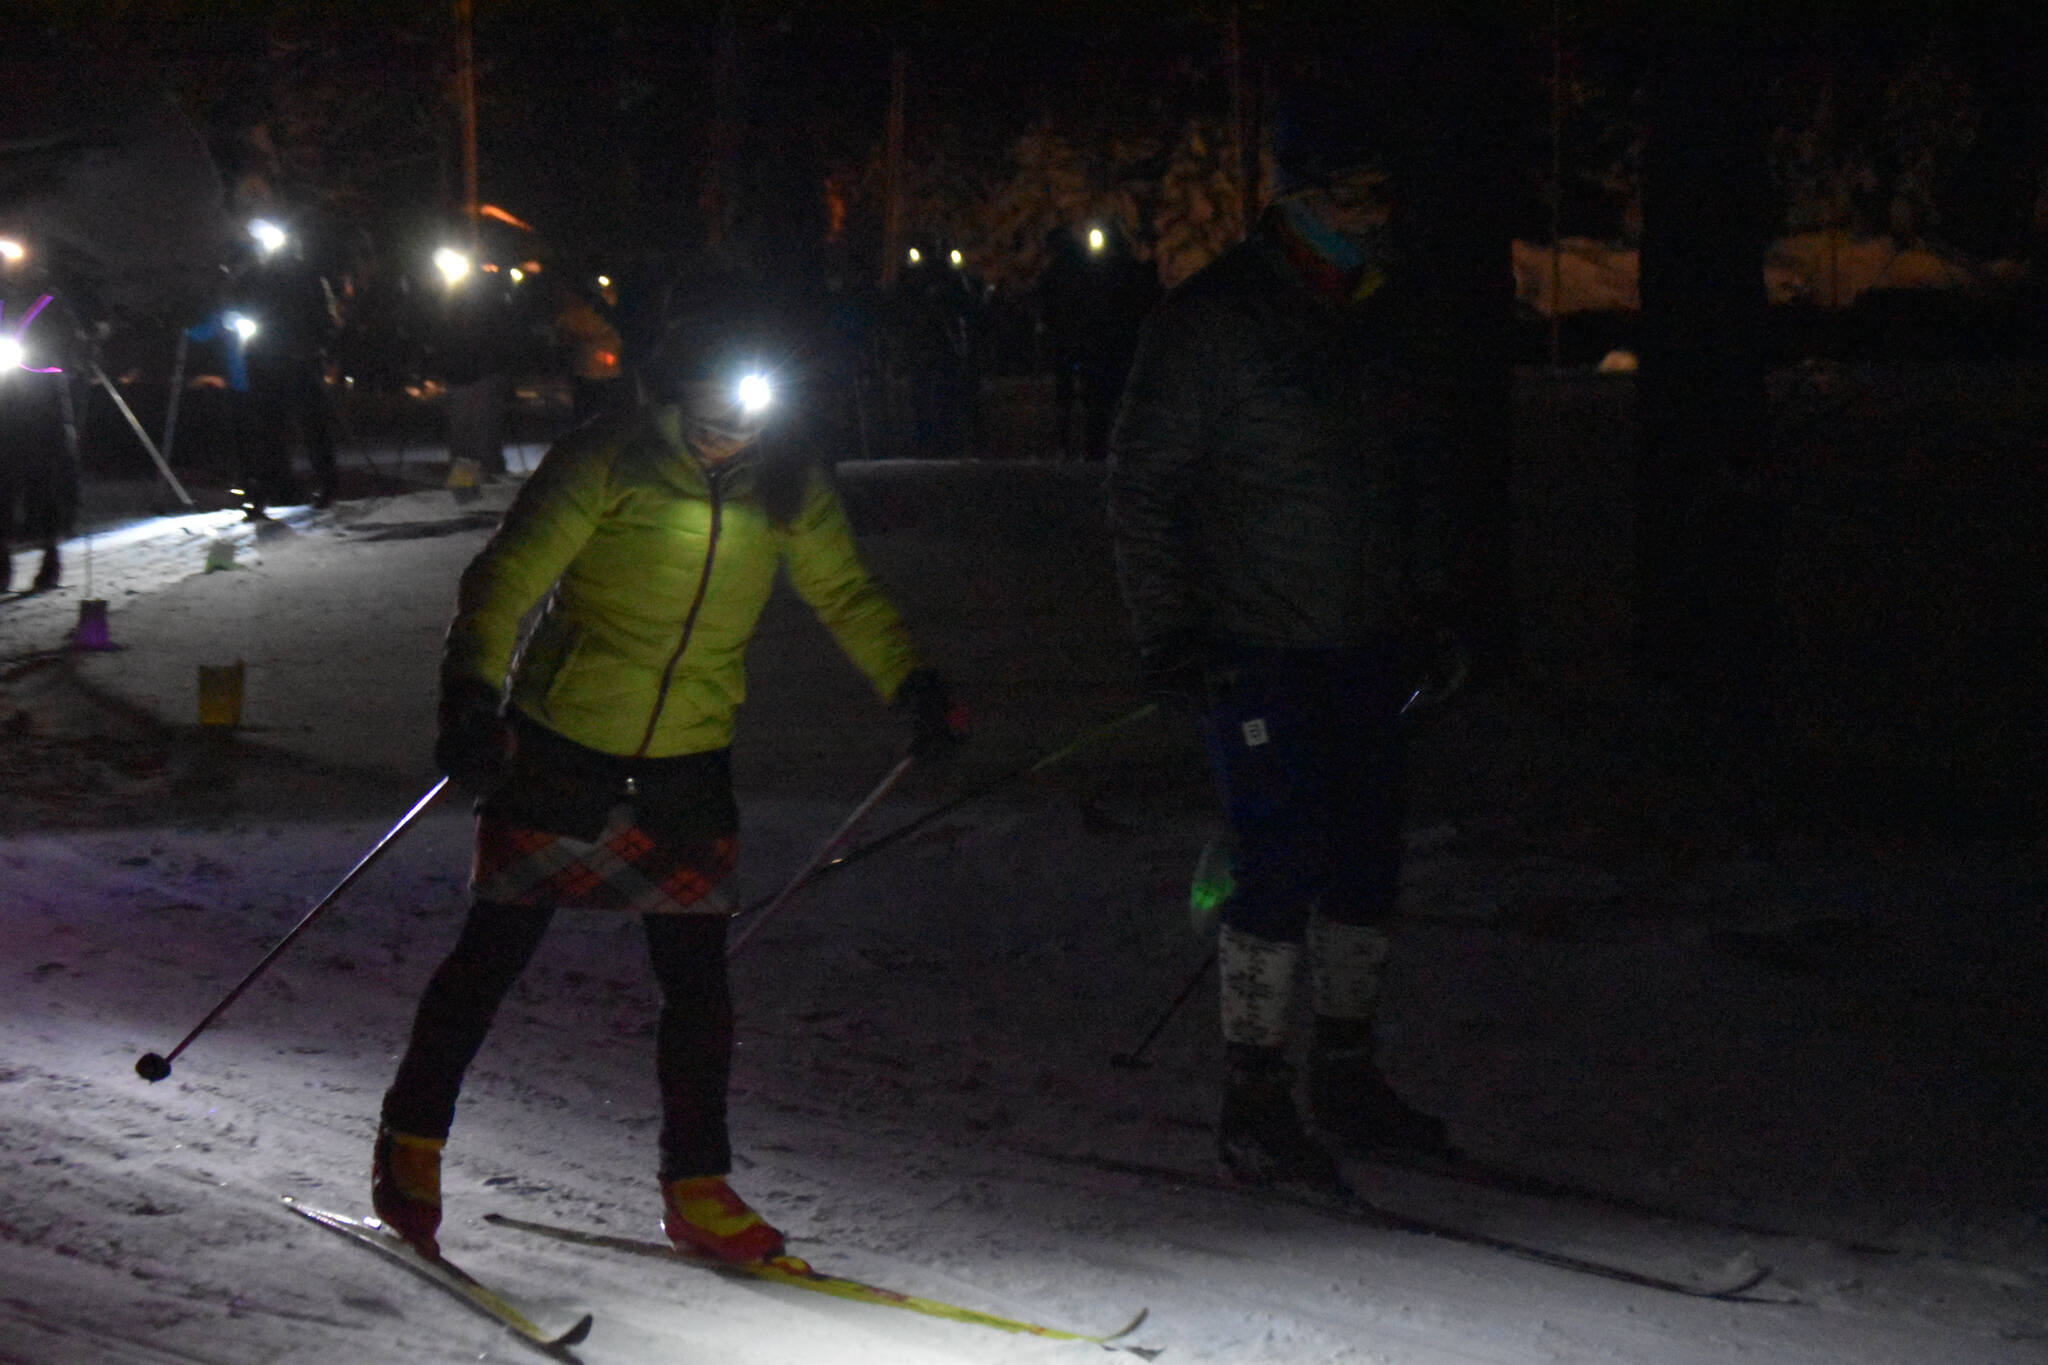 Skiiers take off down the trail during StarLight StarBright: A Winter Solstice Ski Event on Wednesday, Dec. 21, 2022 at the Kenai Golf Course in Kenai, Alaska.